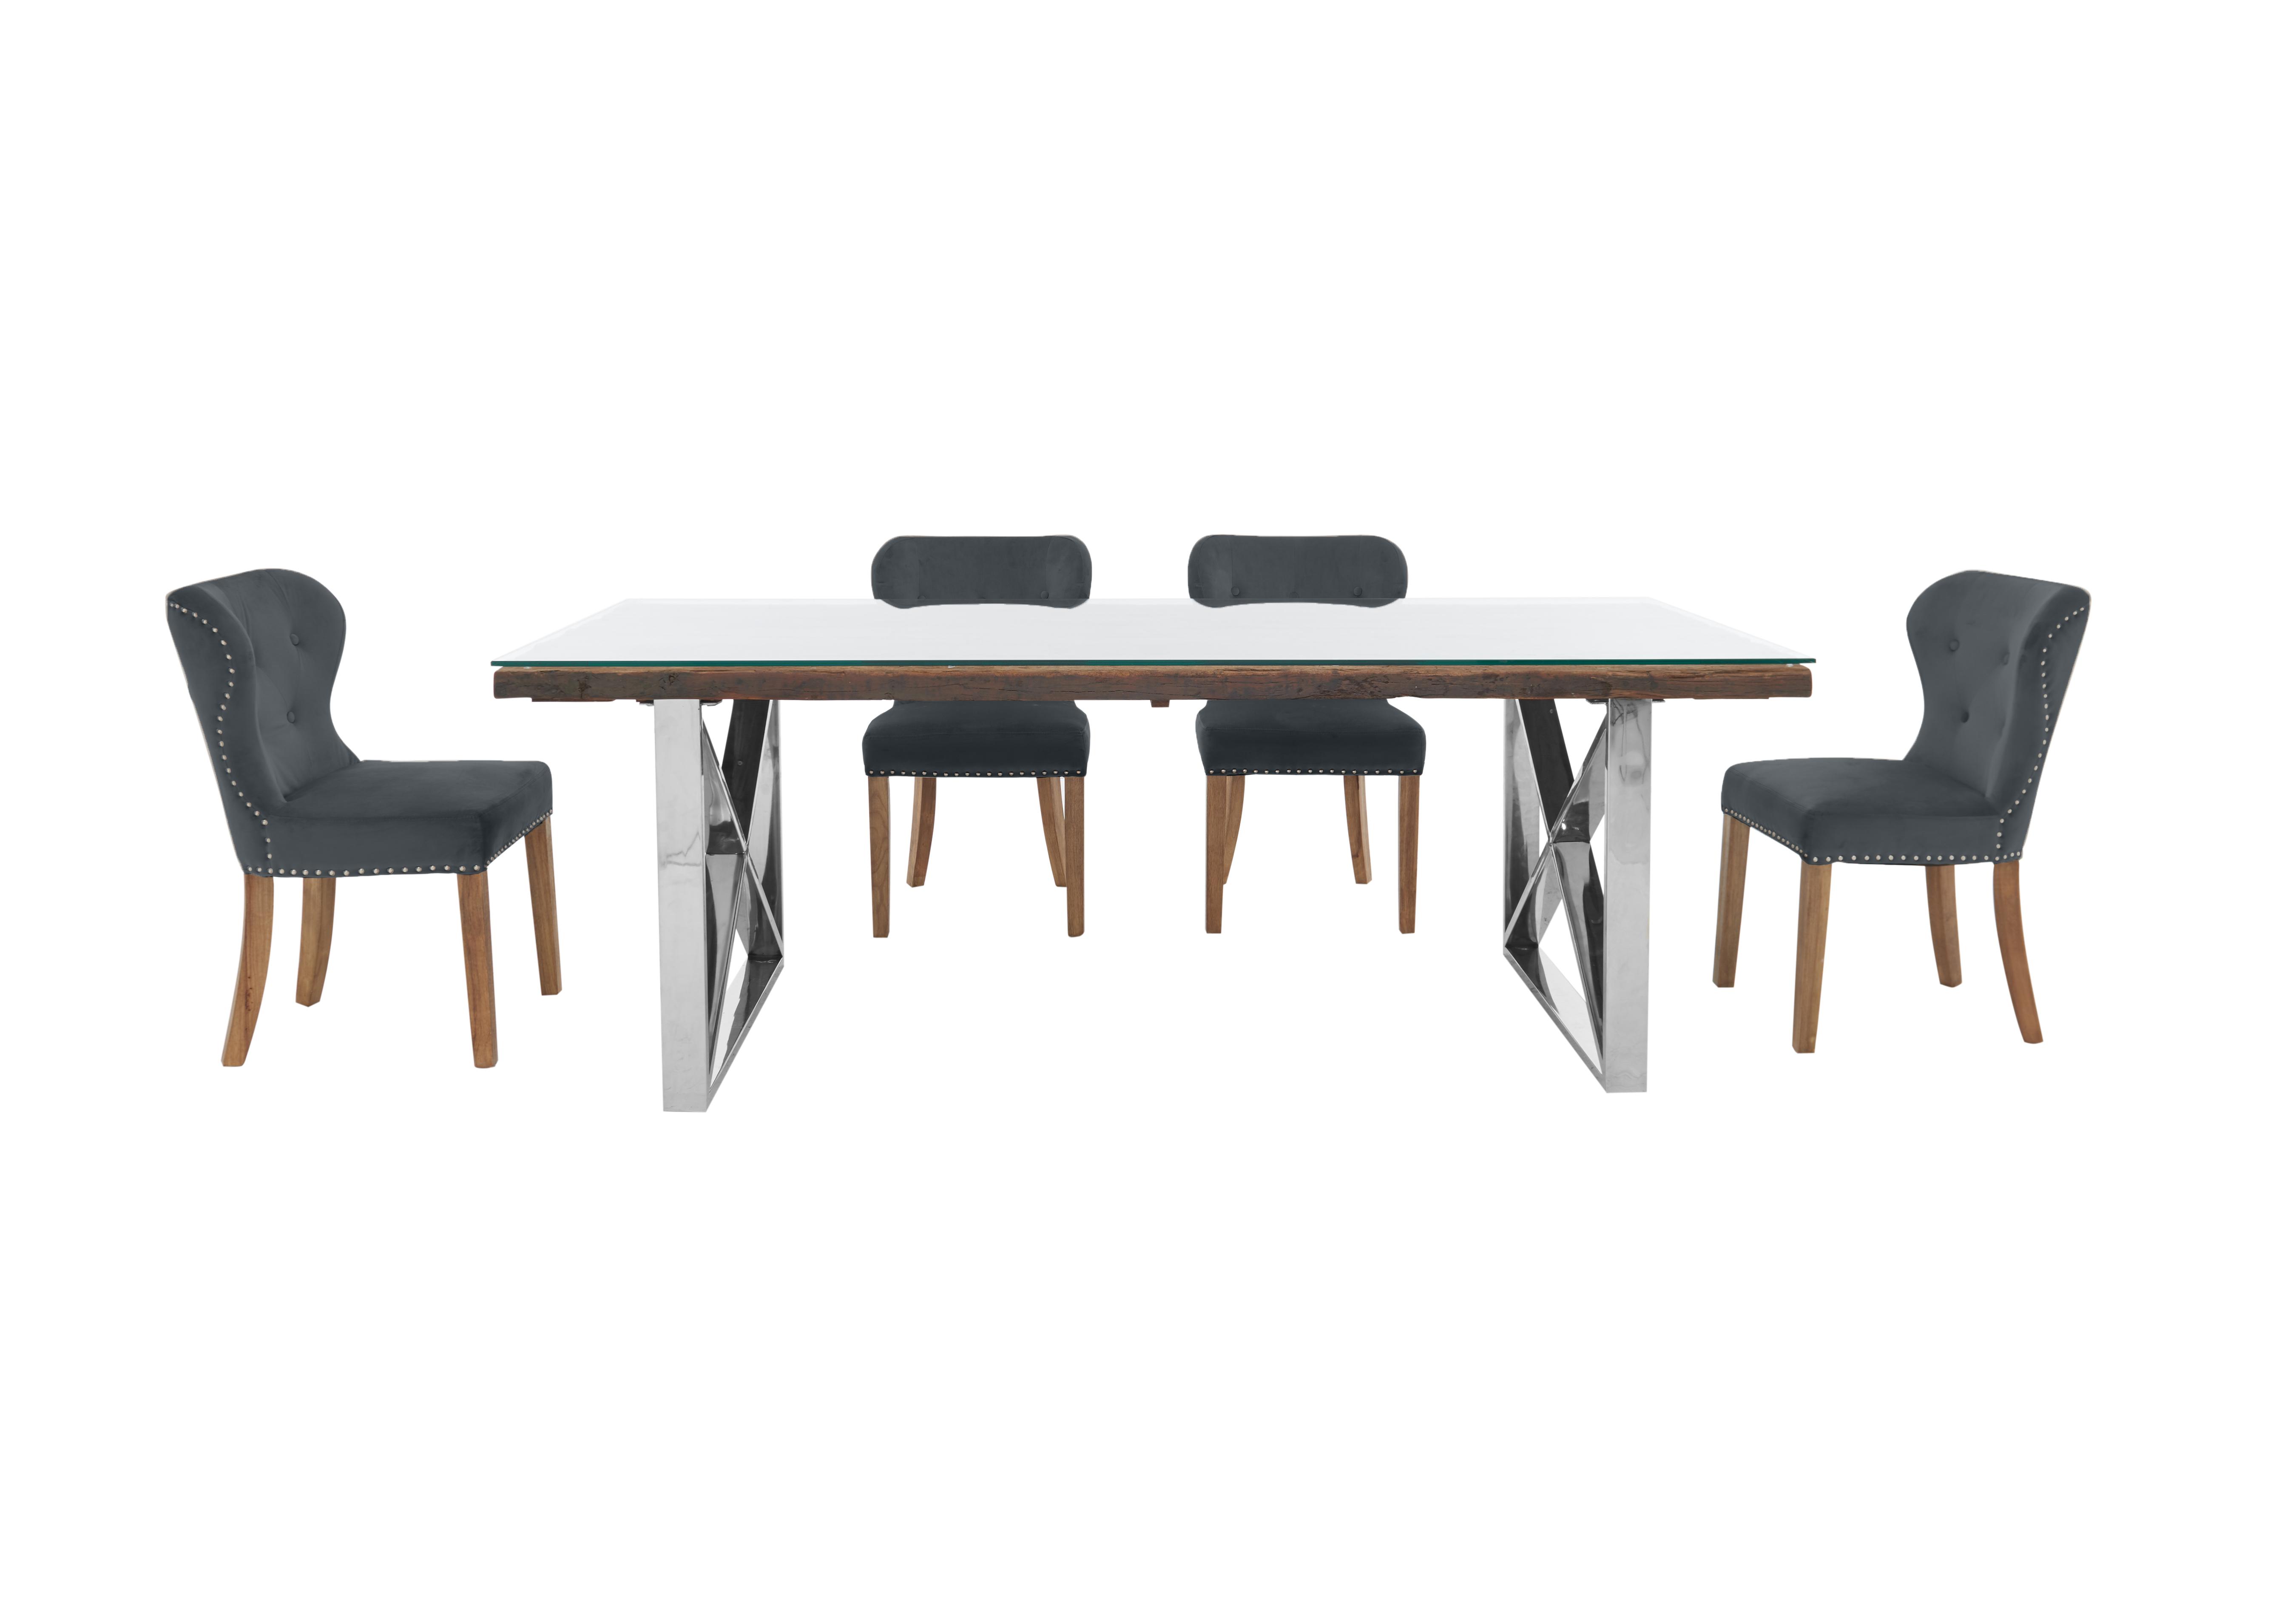 Chennai Dining Table with X-Leg Base and 4 Upholstered Dining Chairs in Grey Chairs on Furniture Village